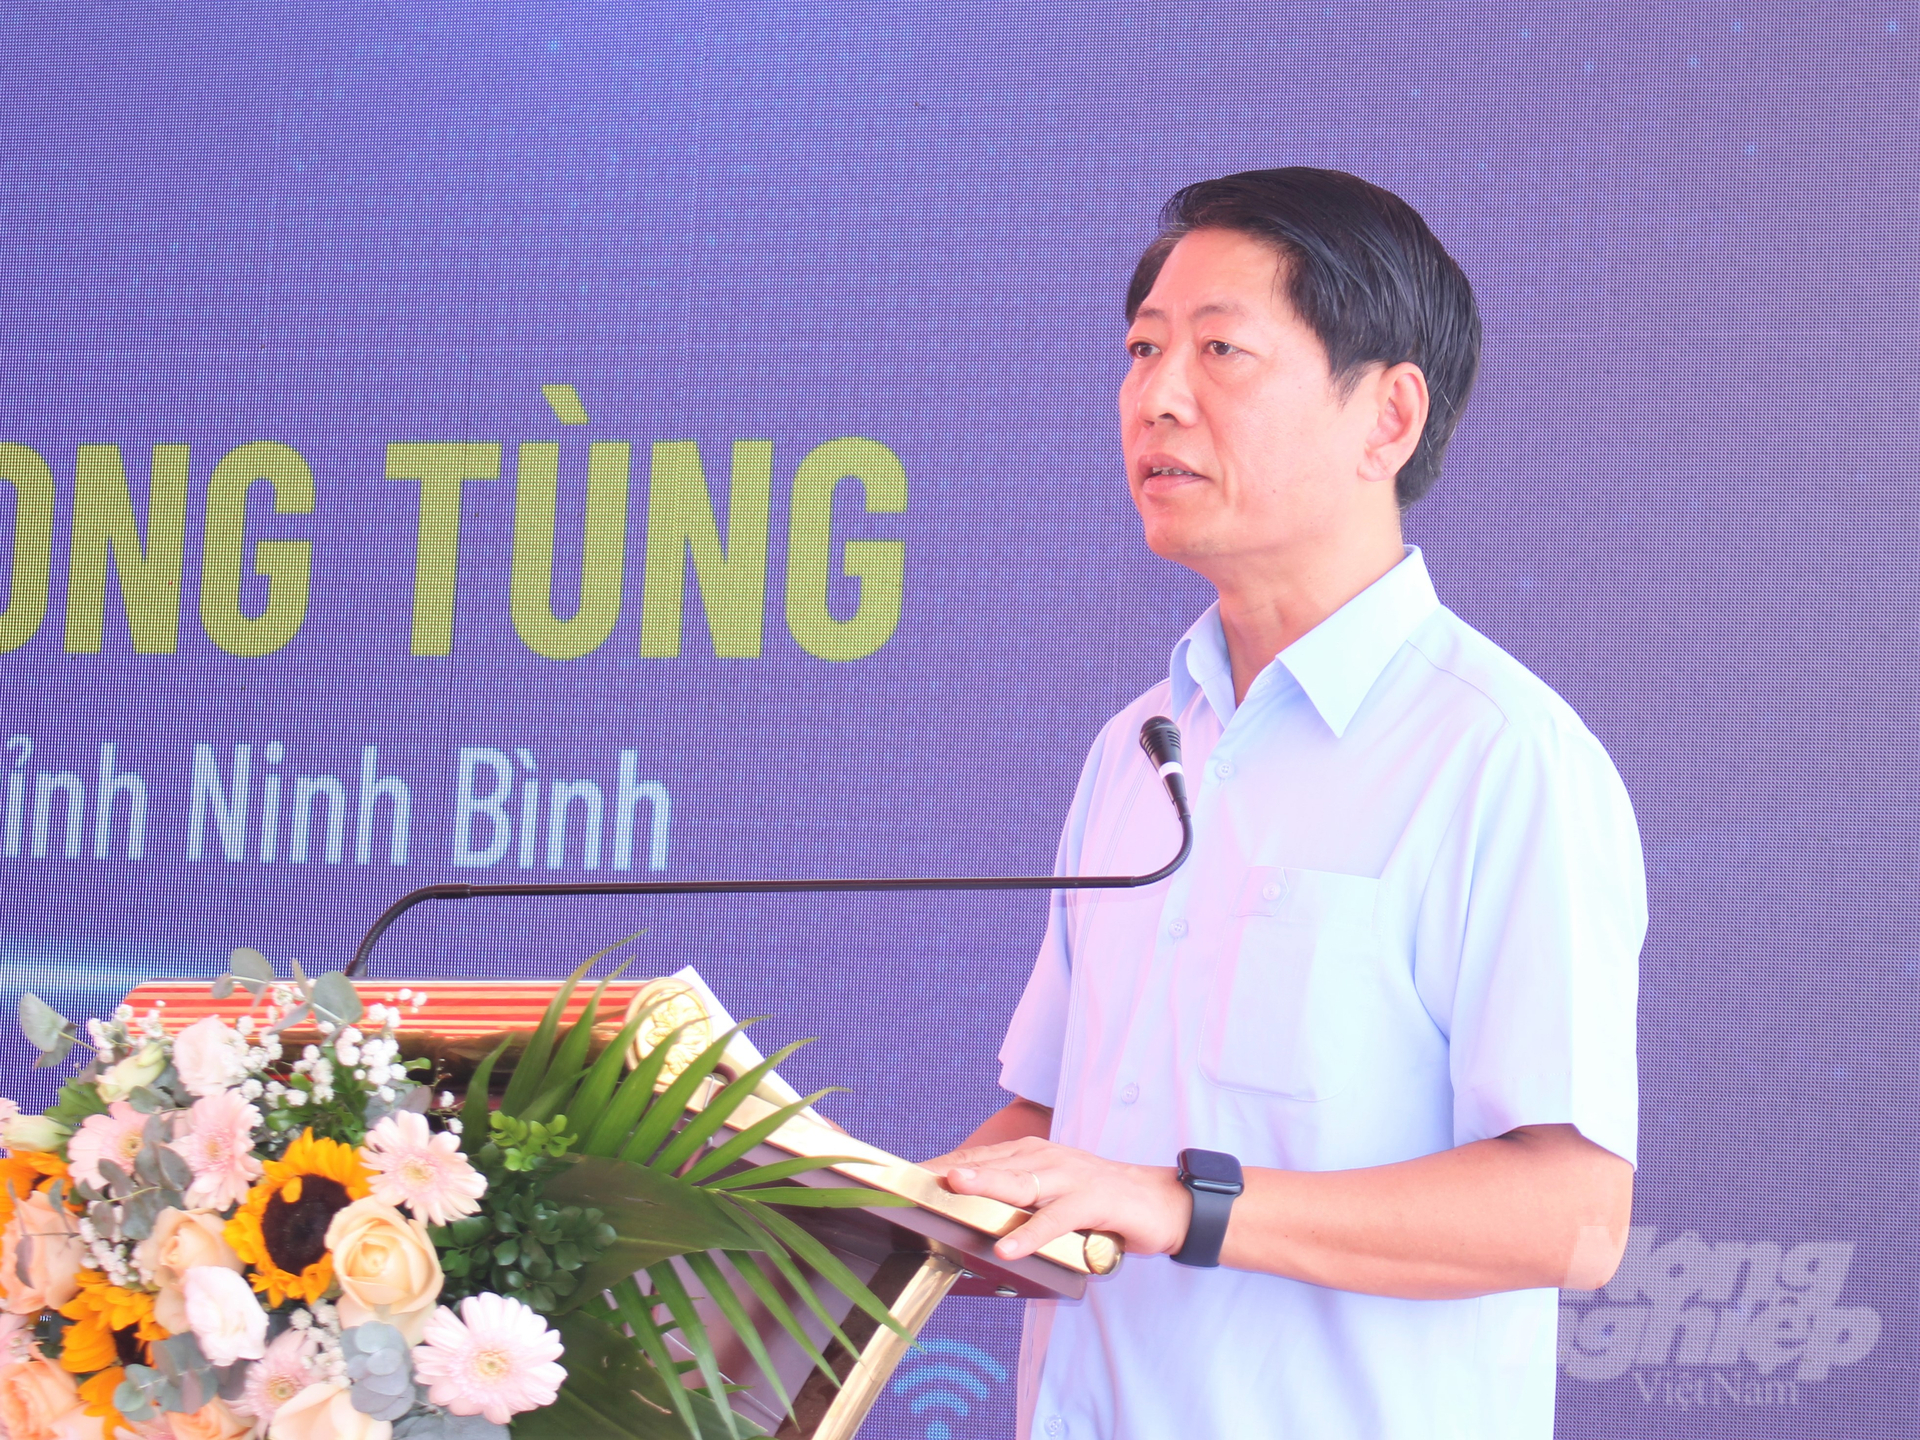 According to Mr. Tran Song Tung, Vice Chairman of Ninh Binh Provincial People's Committee, Ninh Binh Province will create all favorable conditions for the project to be implemented as planned. Photo: Trung Quan.